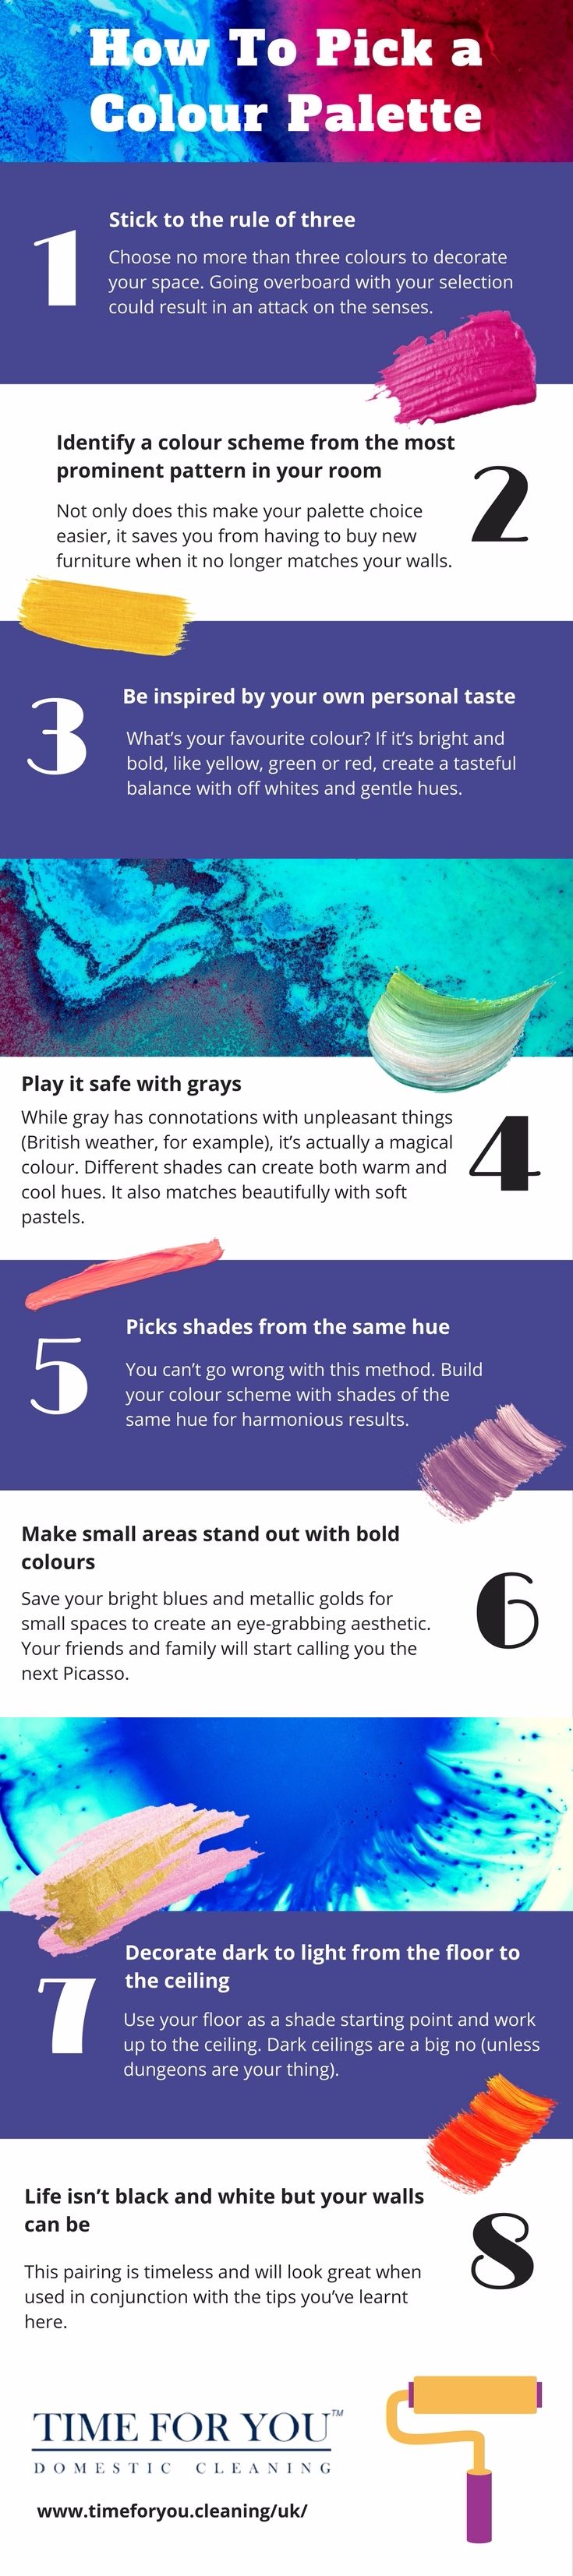 How to Pick a Colour Palette for Your House